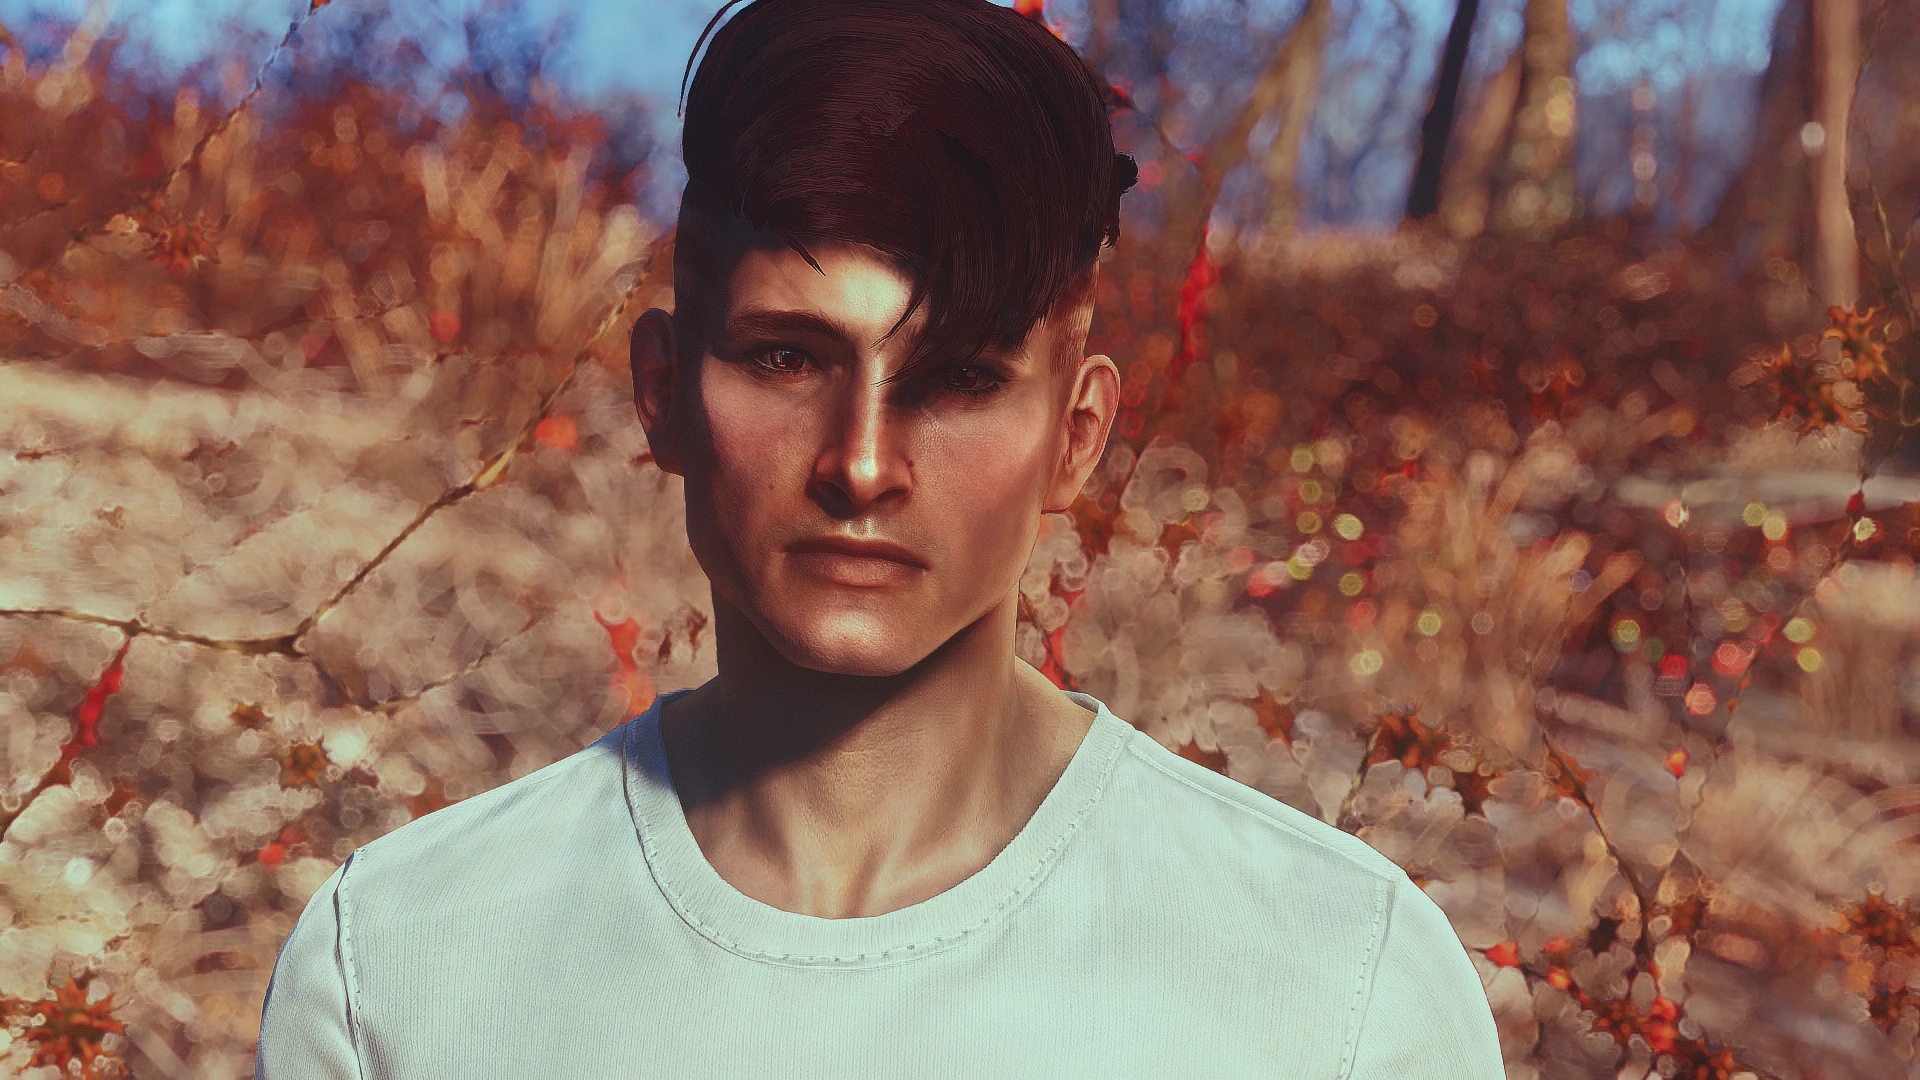 Real hd face textures 2k fallout 4 фото 73